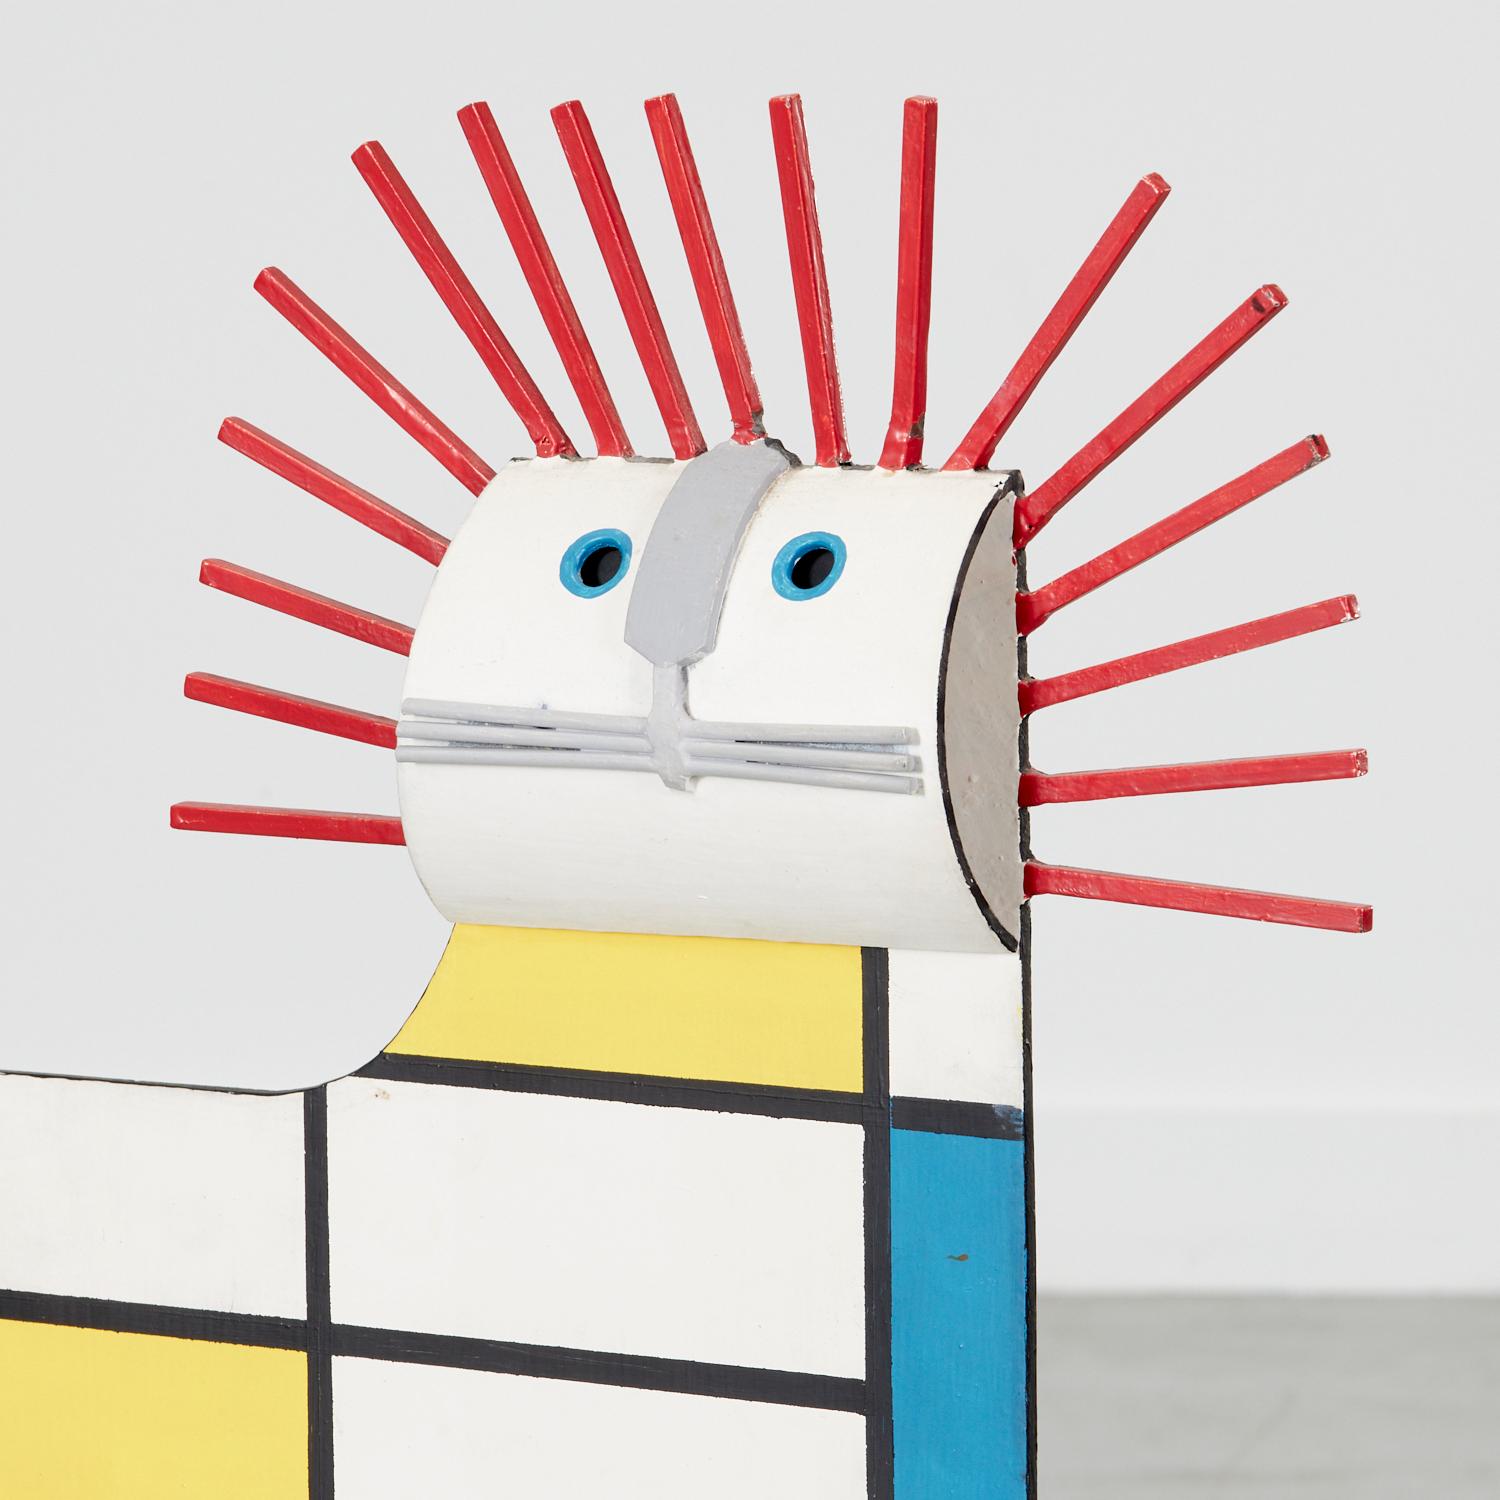 Anne Law (American, 20th c.), Lion, painted metal sculpture in the style of Piet Mondrian, signed in marker 